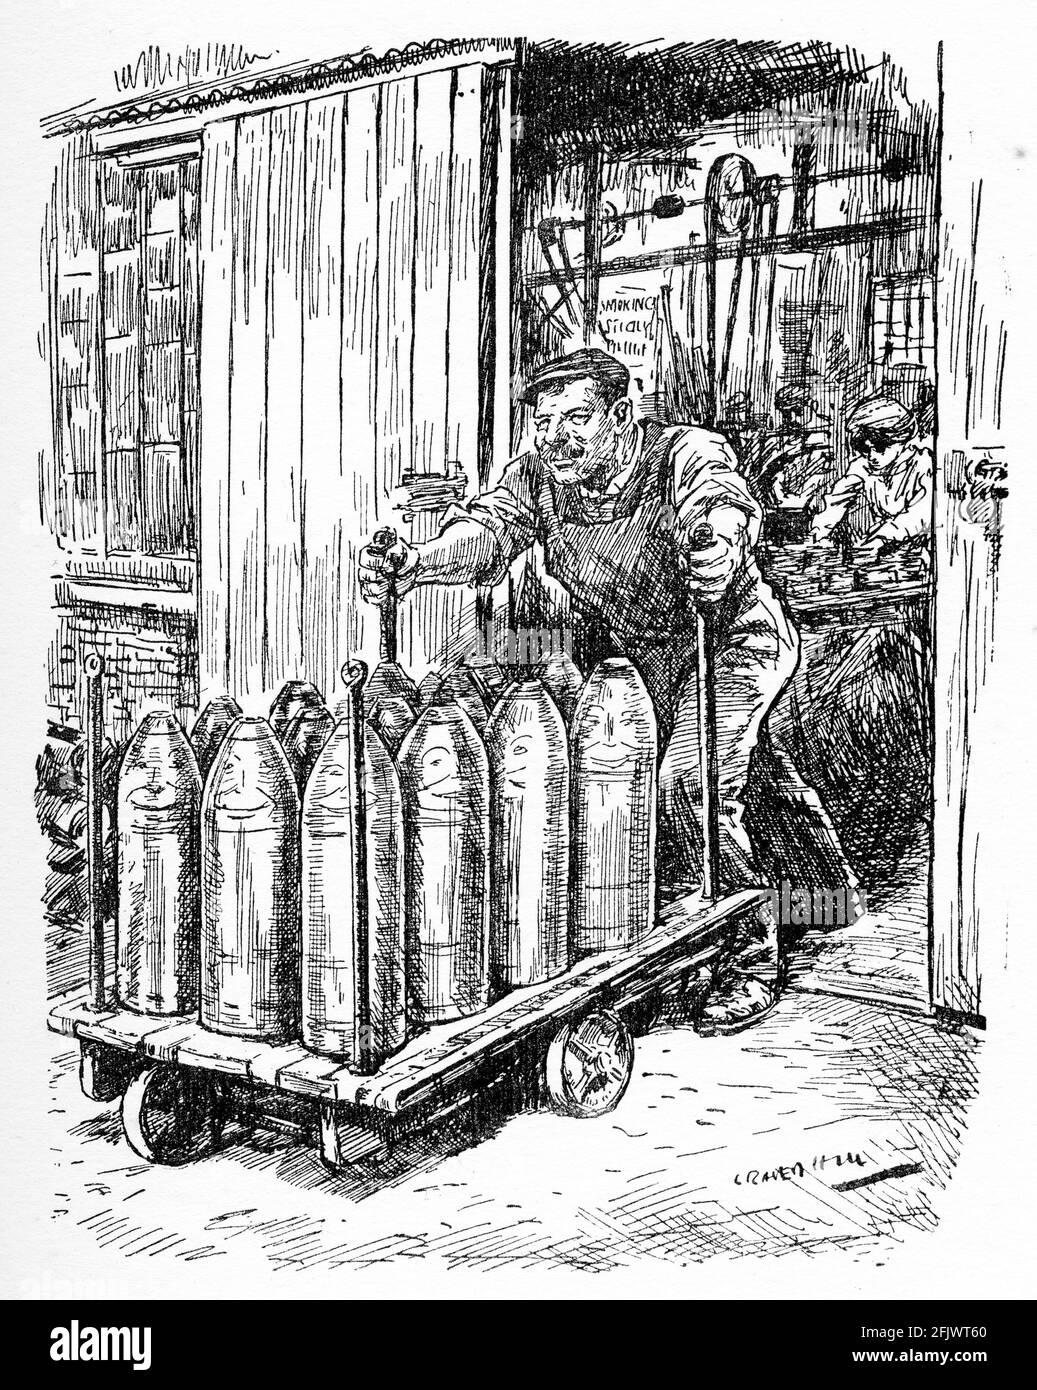 Engraving of a  munitions worker pushing out a large load of artillery shells during World War One. Stock Photo